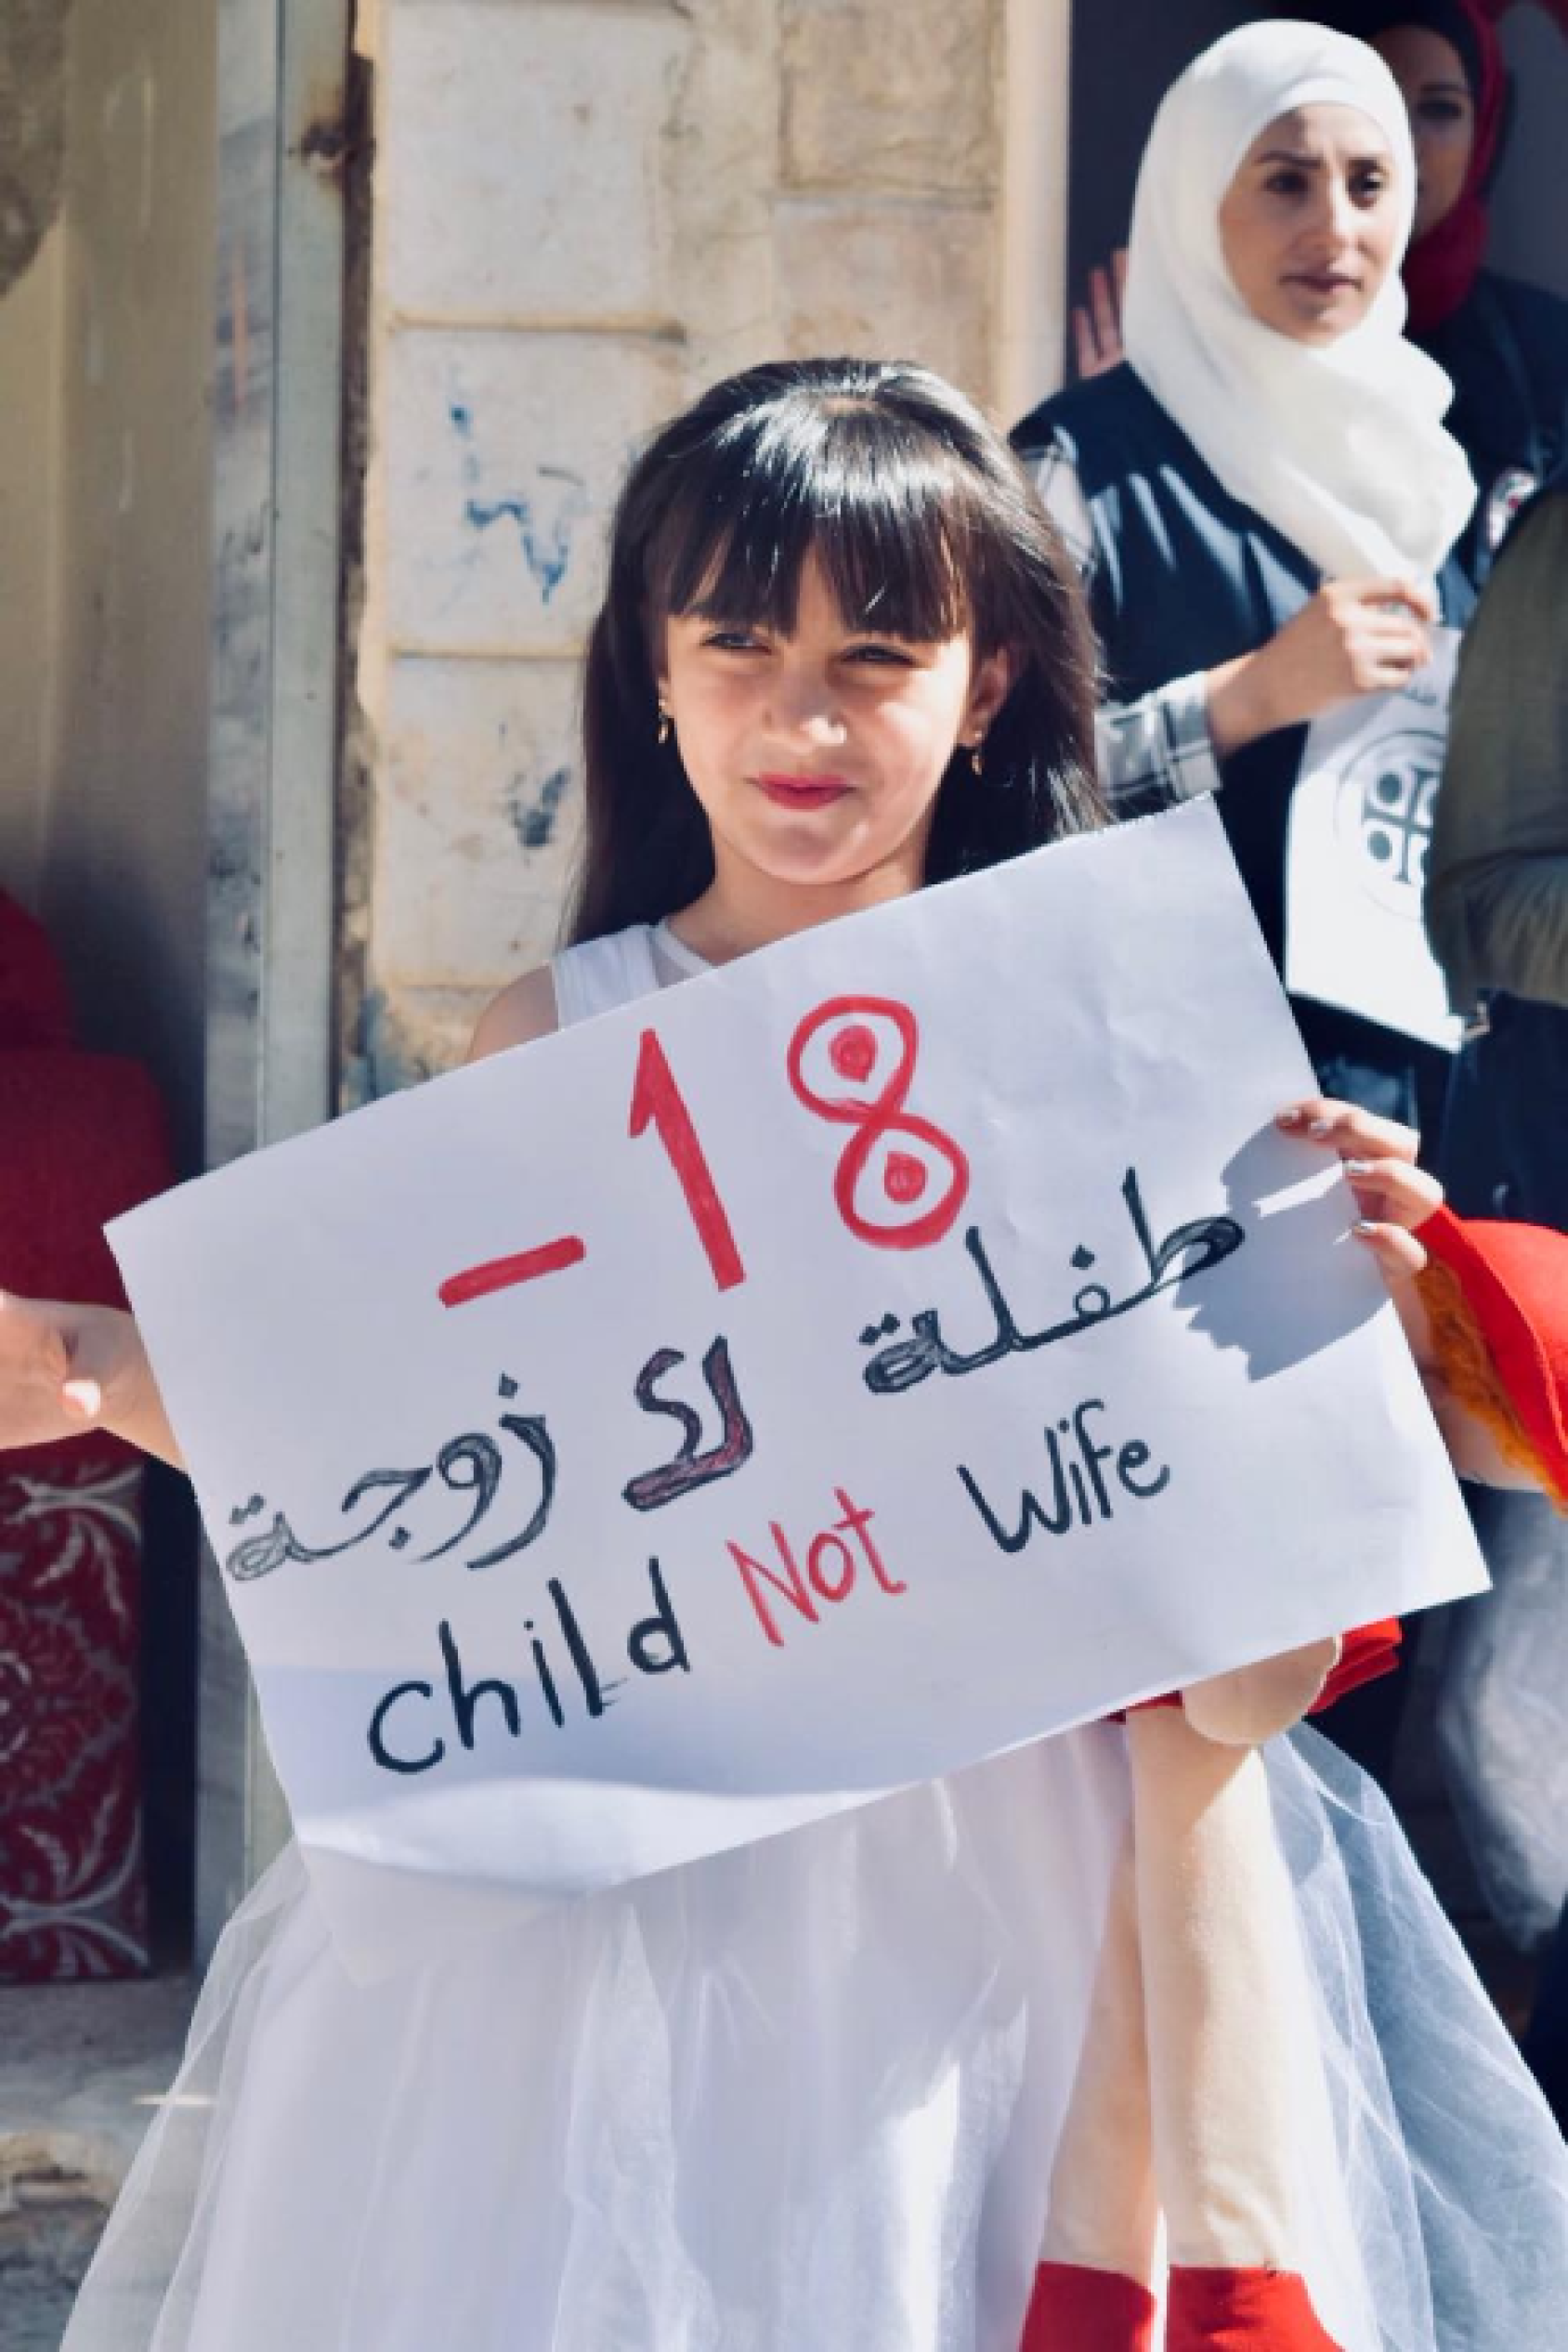 A young girl wearing a wedding dress and holding a sign that says: child not wife.